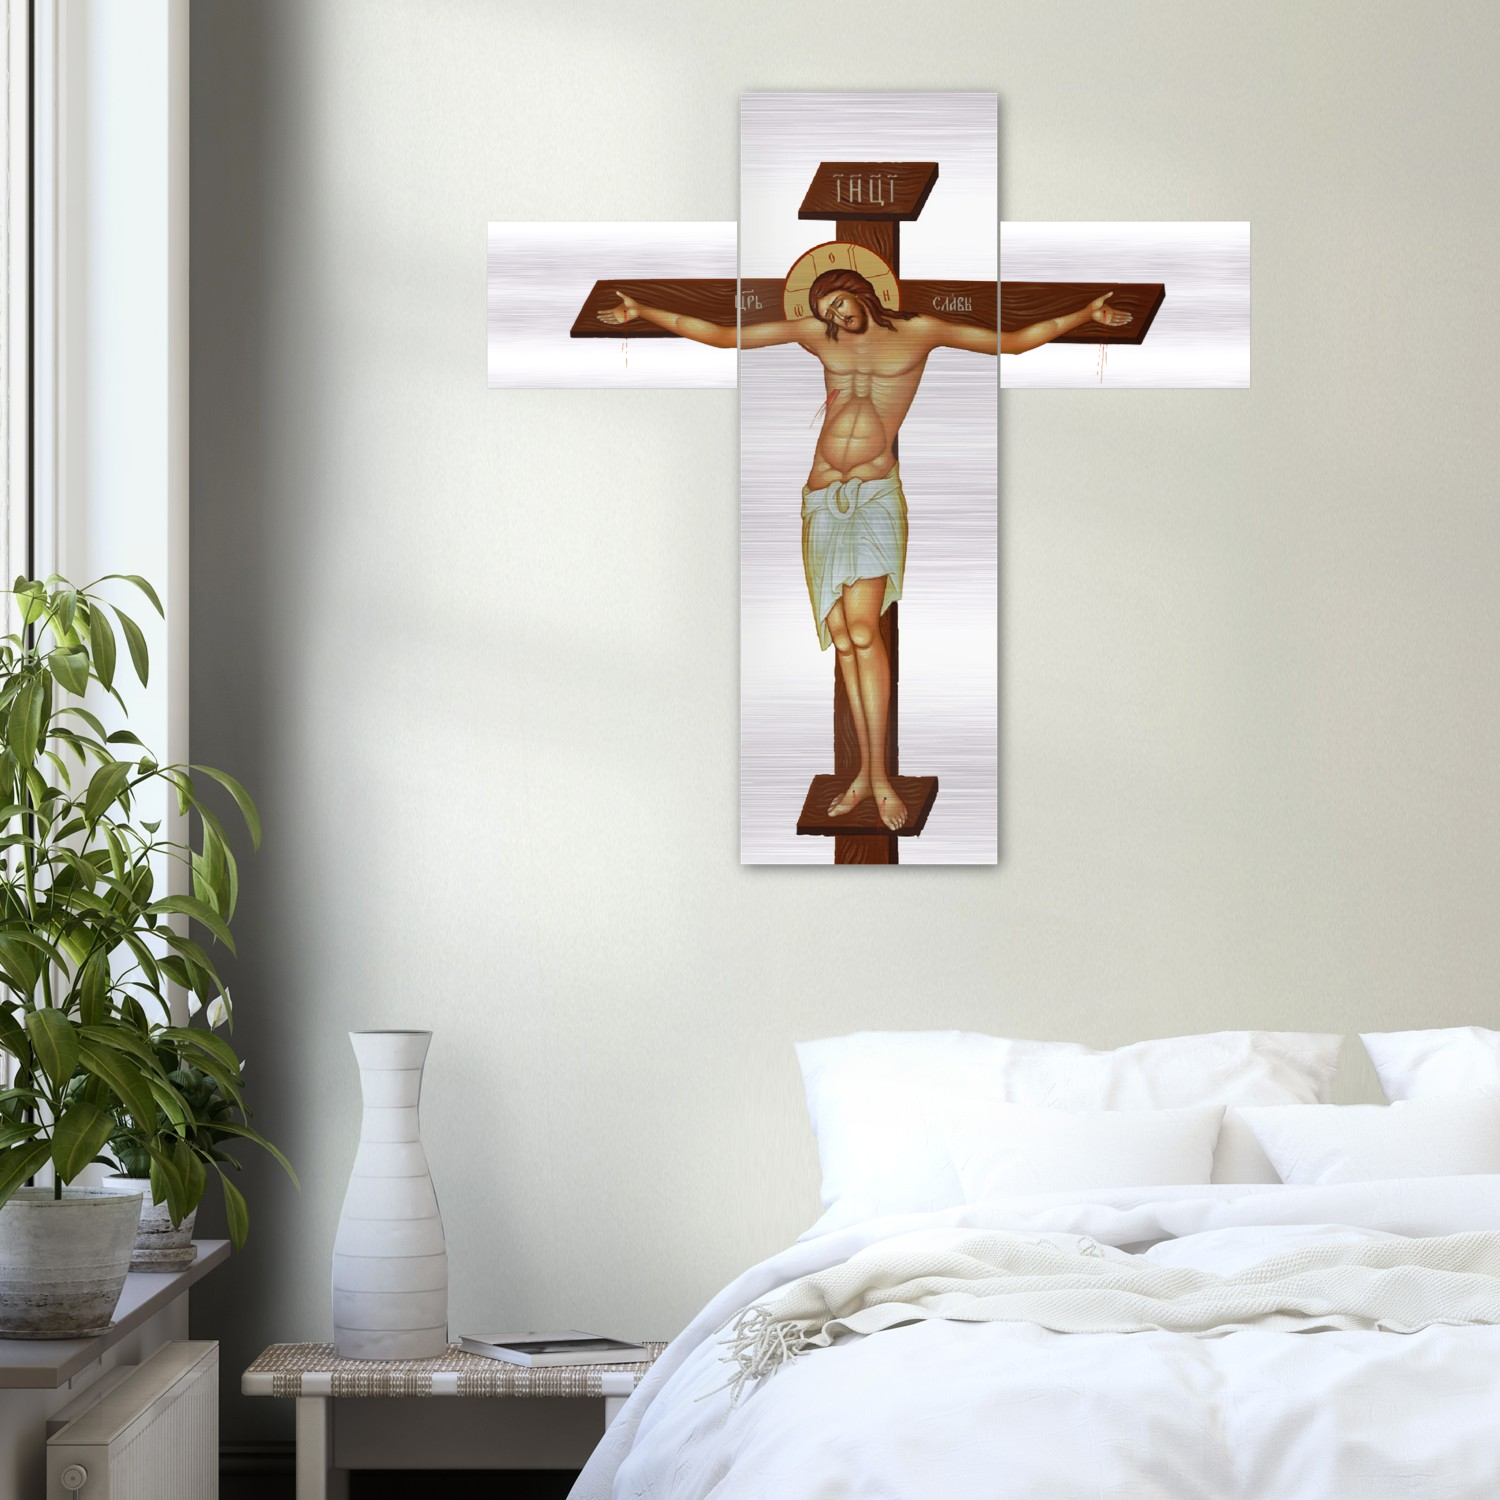 Crucifixion of Our Lord Jesus Christ - Russian Triptych - Brushed #Aluminum #MetallicIcon #AluminumPrint - 3 panels Style : Byzantine/Greek